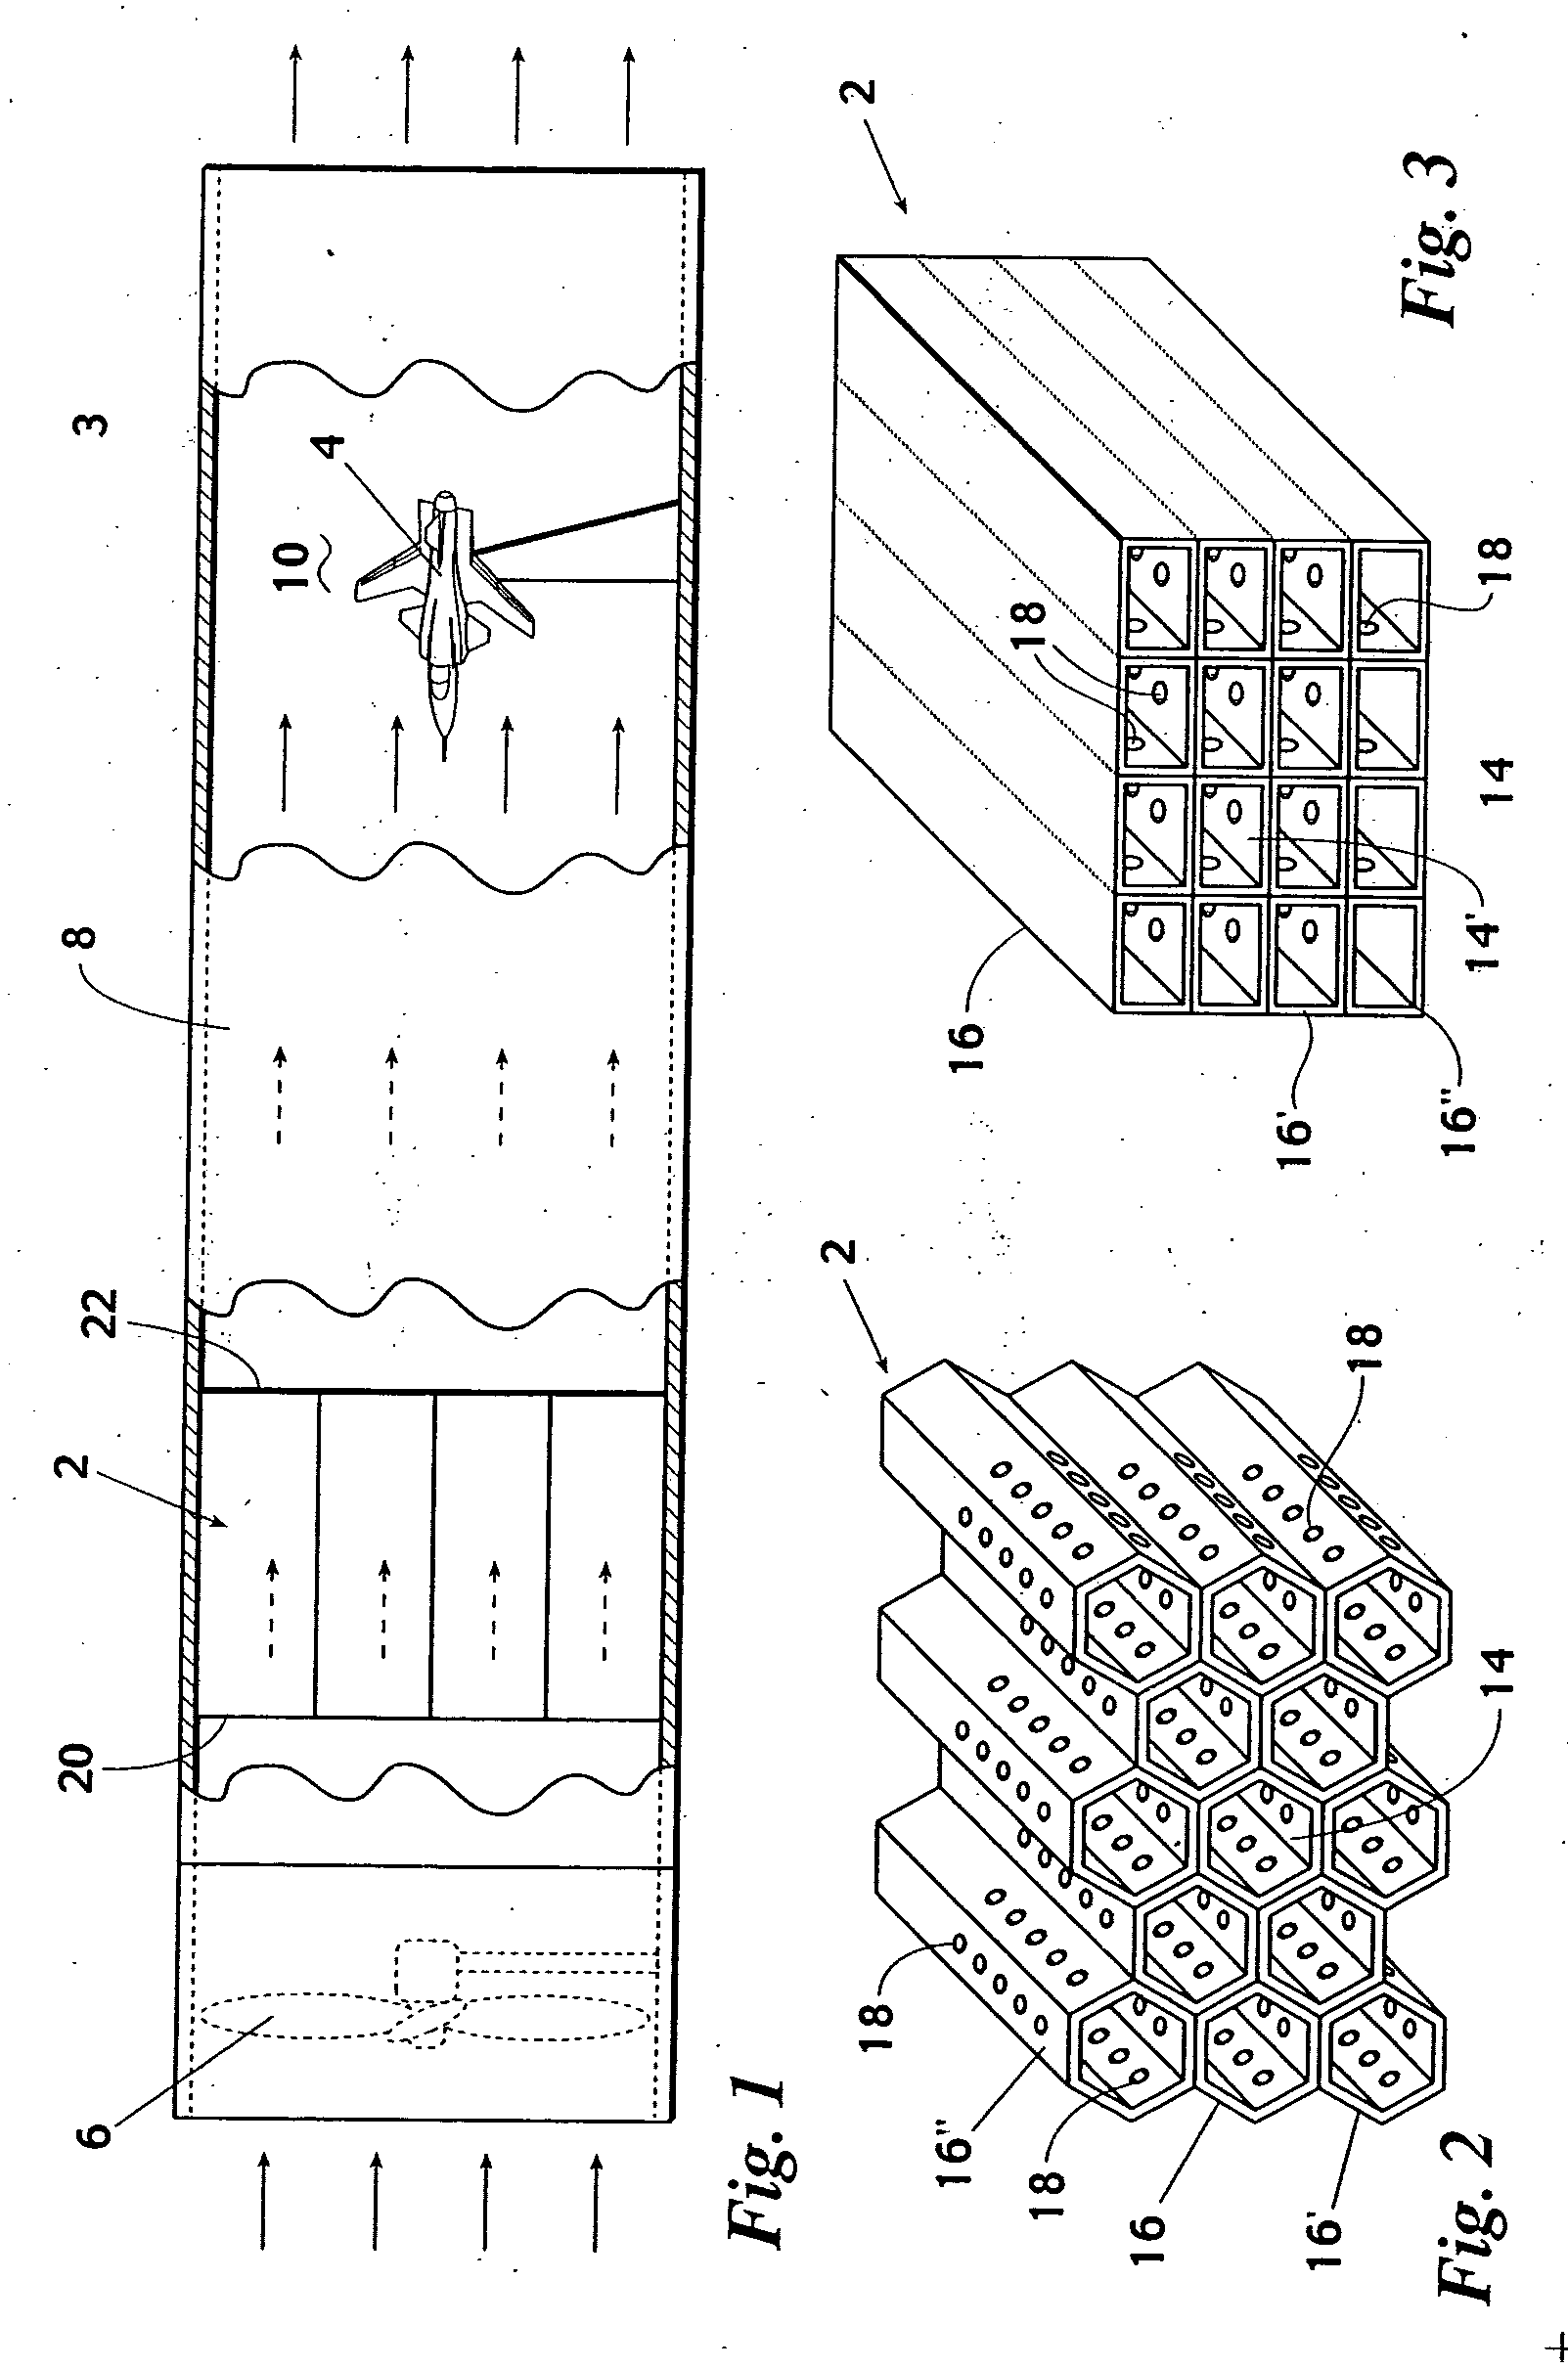 Structure and method for improving flow uniformity and reducing turbulence